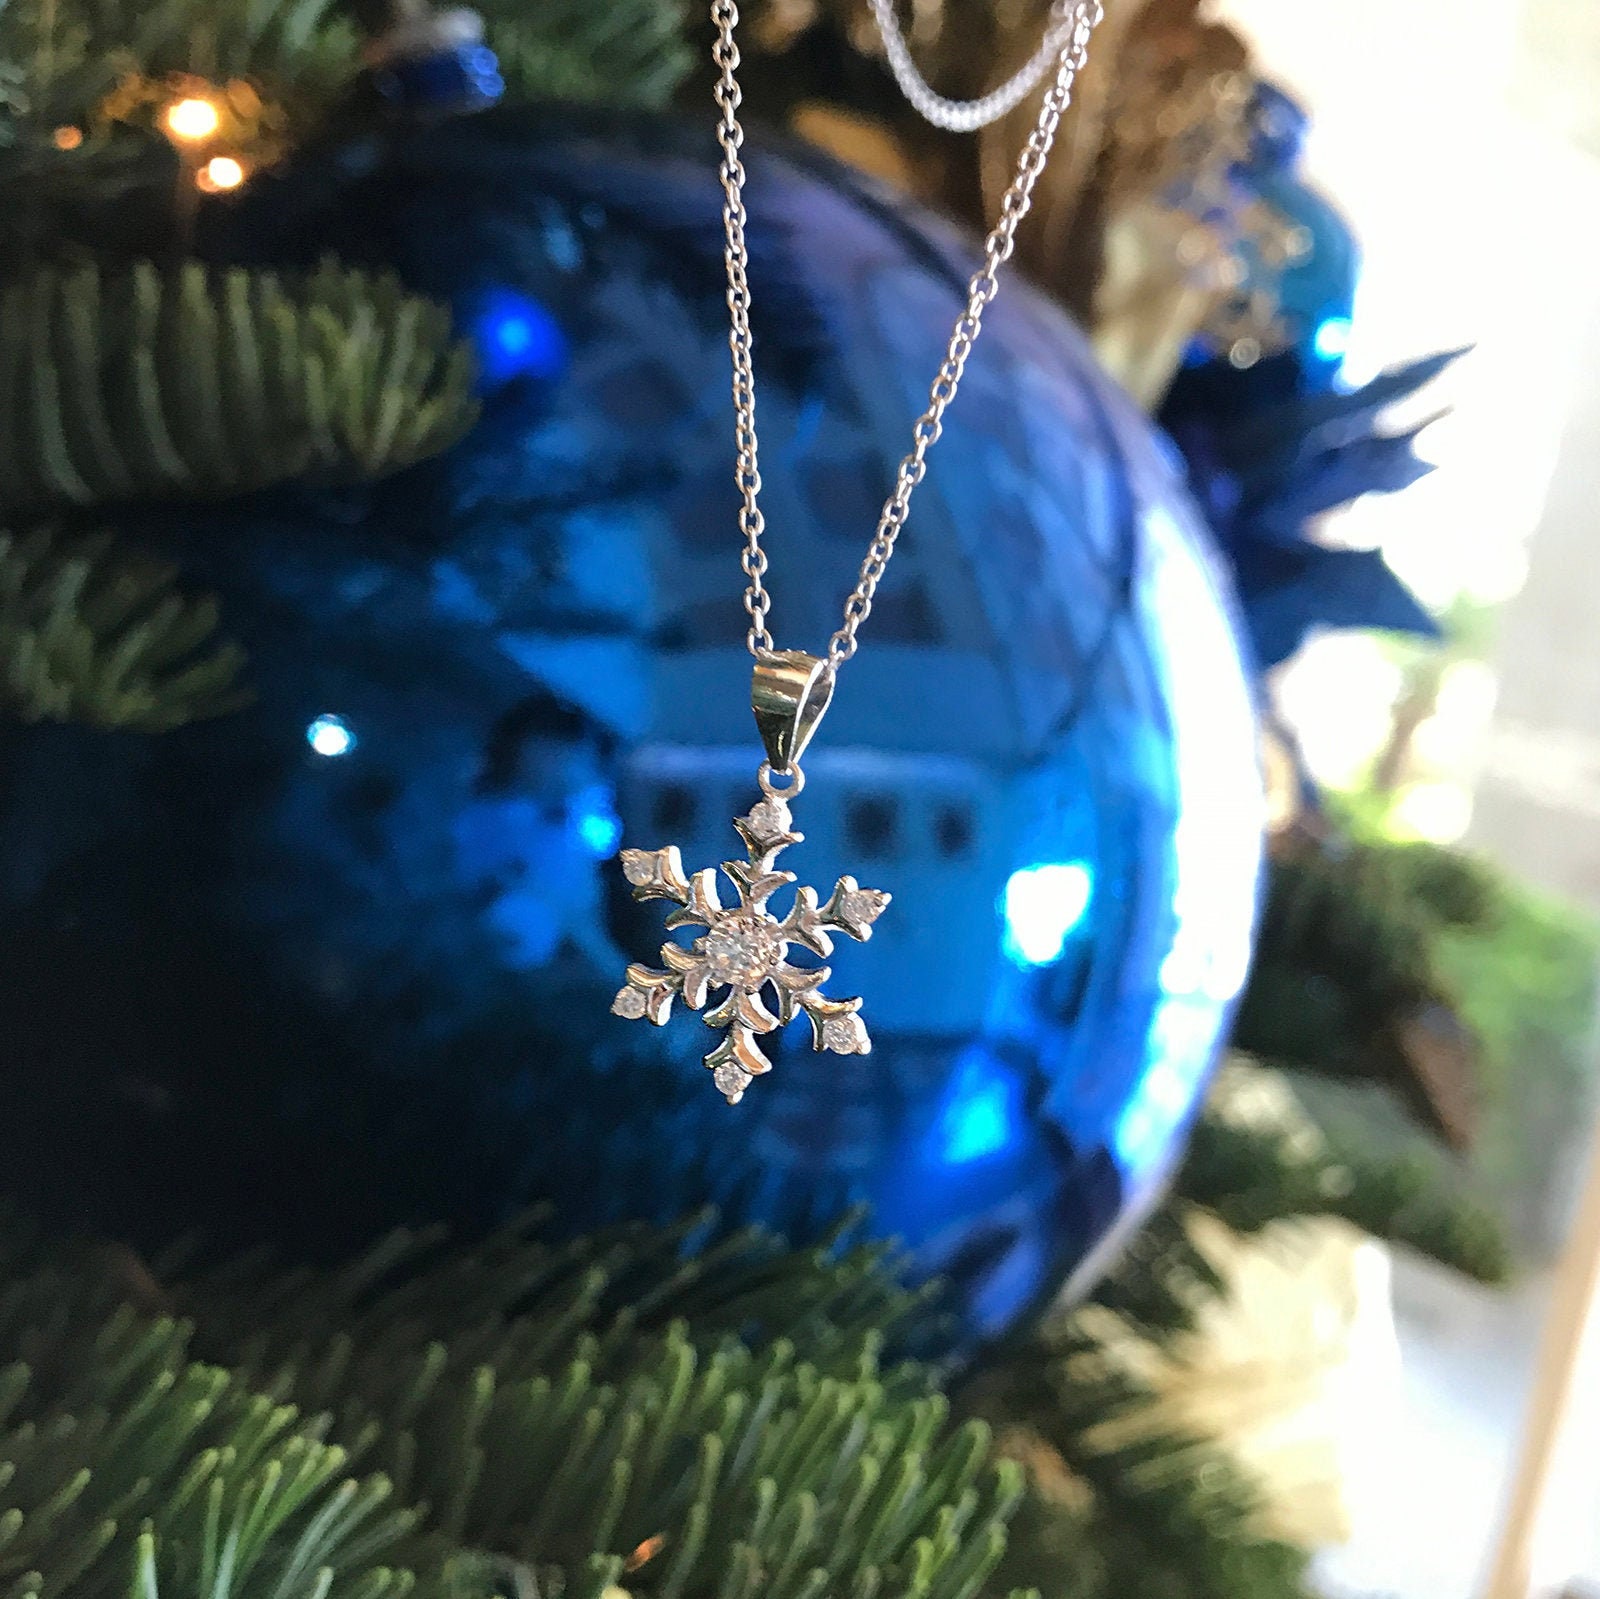 Blue Snowman and Snowflake Charm Necklace - Pendant Necklace - Christmas  Necklace - Christmas Jewelry Gift - NE3091C - FIONA ACCESSORIES